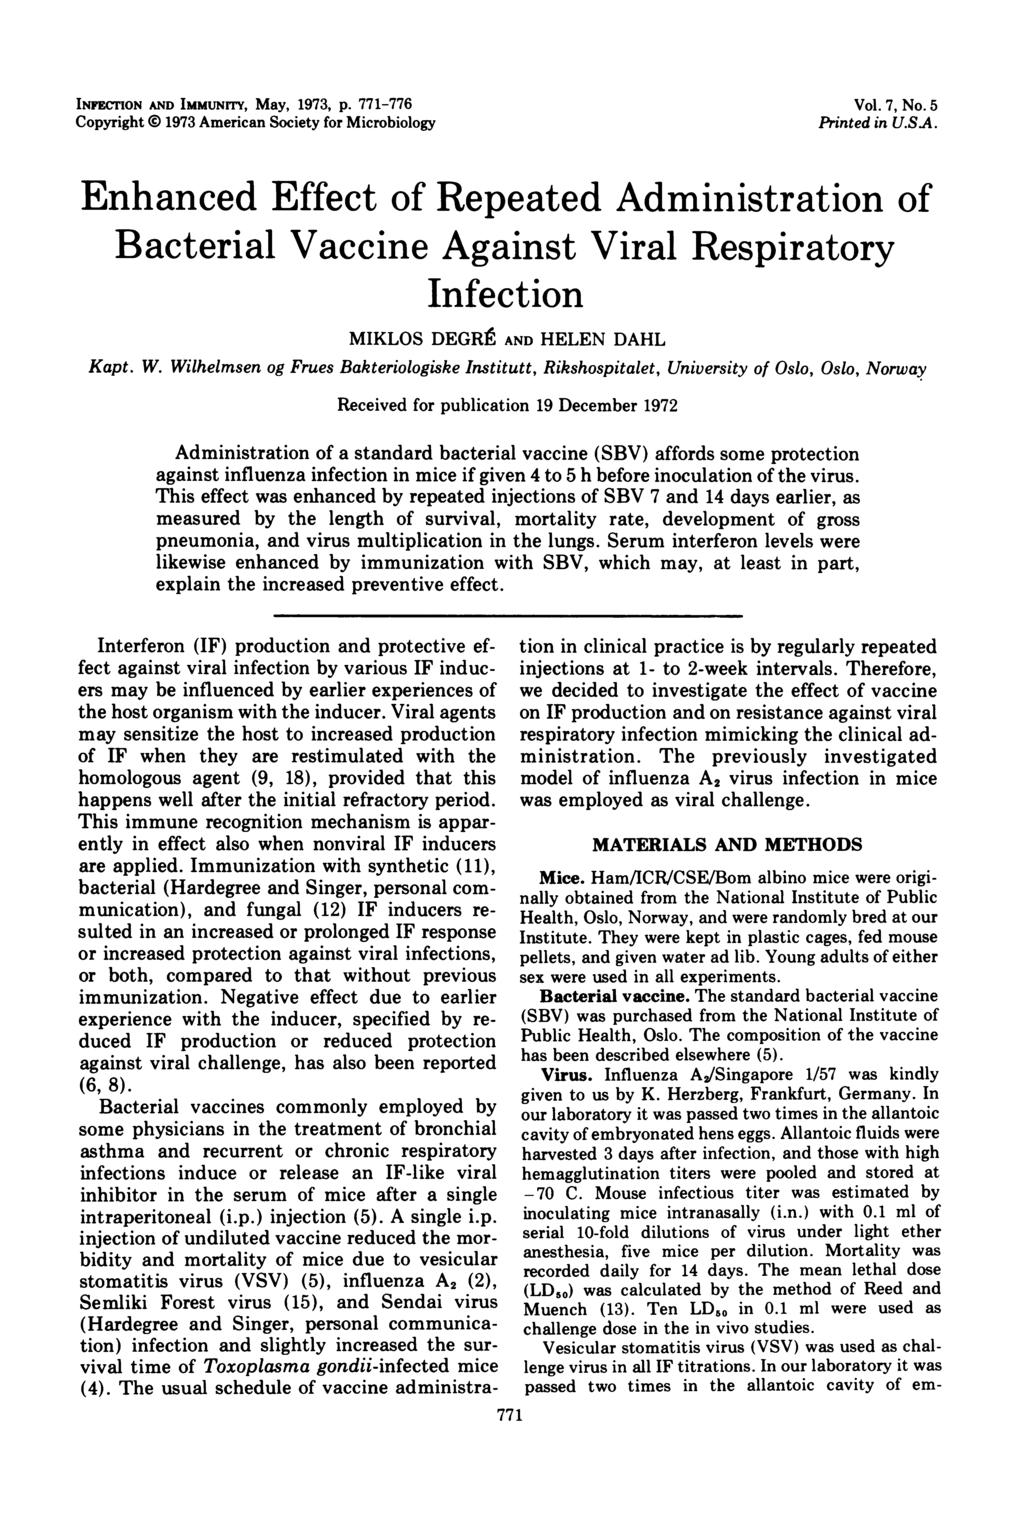 INFECrlON AND IMMUNrrY, May, 1973, p. 771-776 Copyright 0 1973 American Society for Microbiology Vol. 7, No. 5 Printed in U.SA.